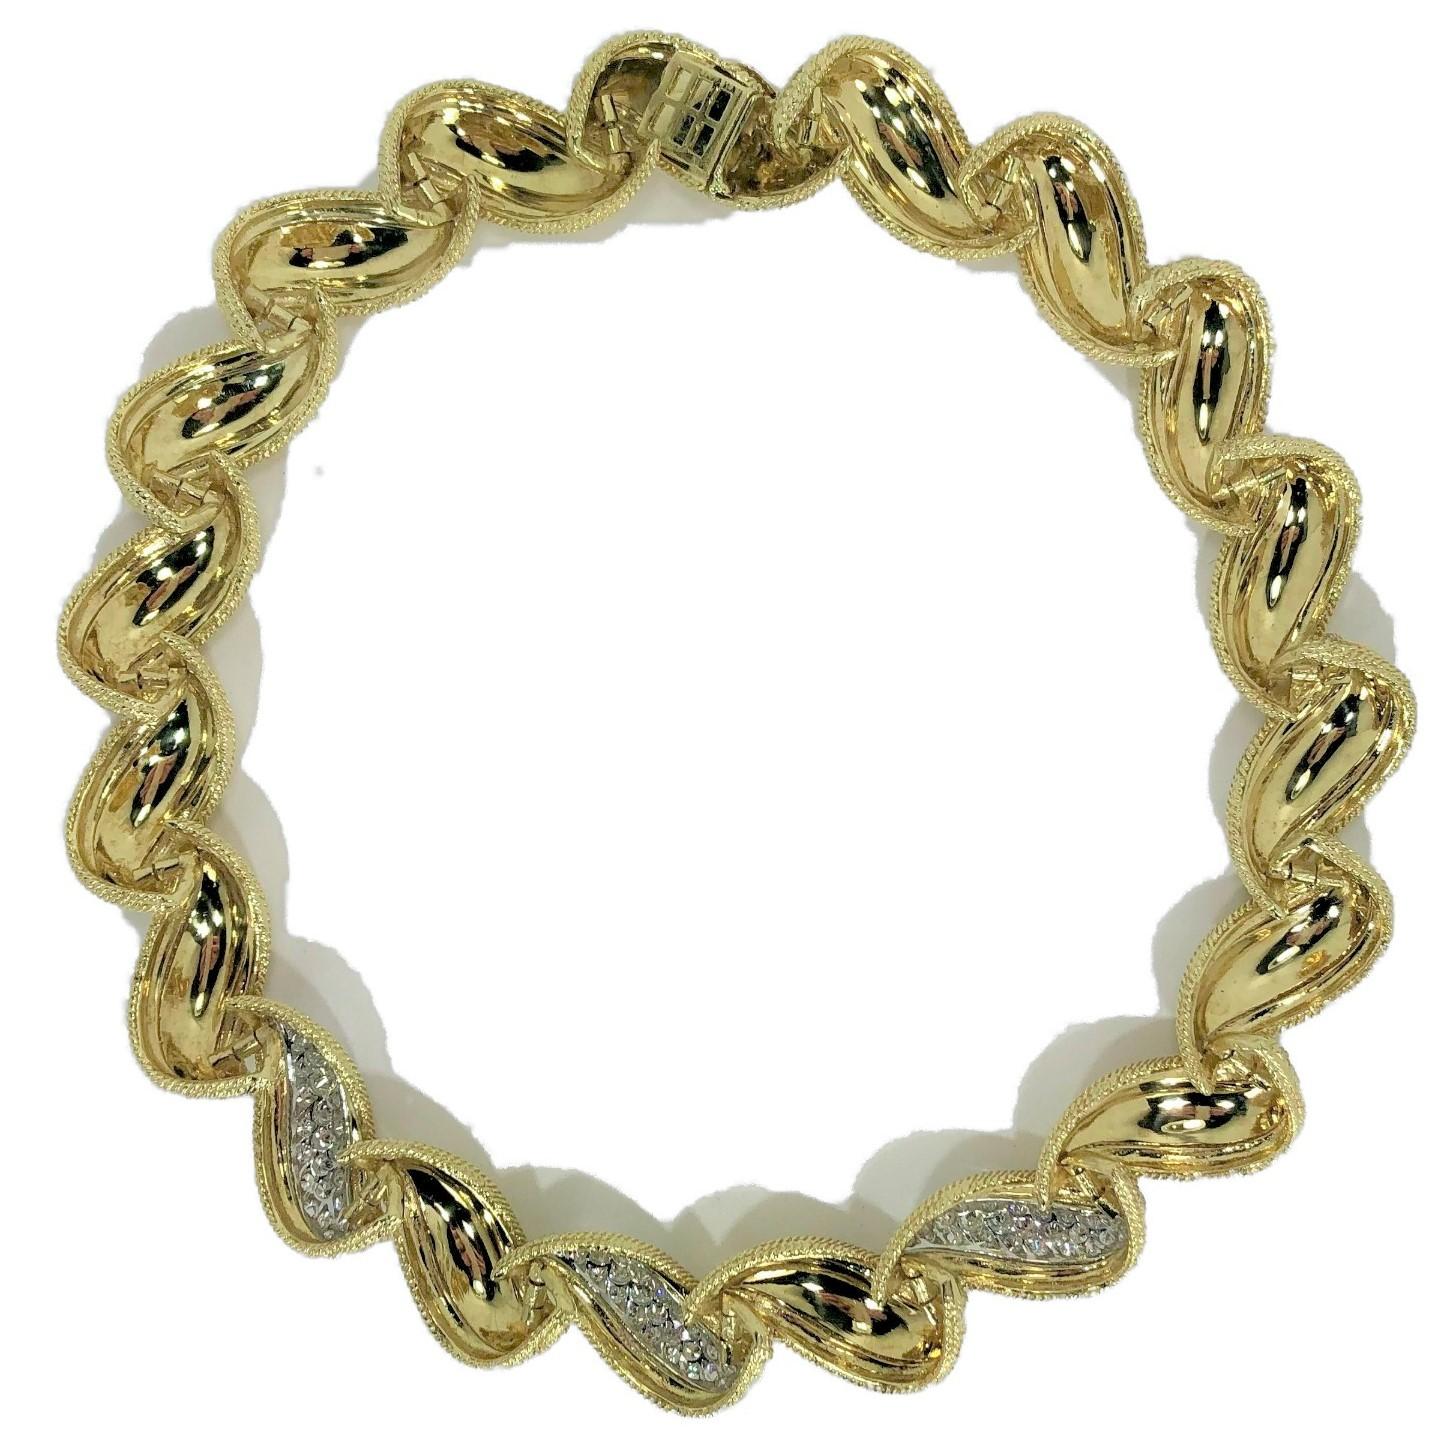 A classic 18k yellow gold and platinum 1960's choker, made up of
sixteen 3/4 inch wide bombe links with hand applied gold rope 
and with three links containing a total of 96 round diamonds set in 
platinum plates. Diamonds have a total weight of